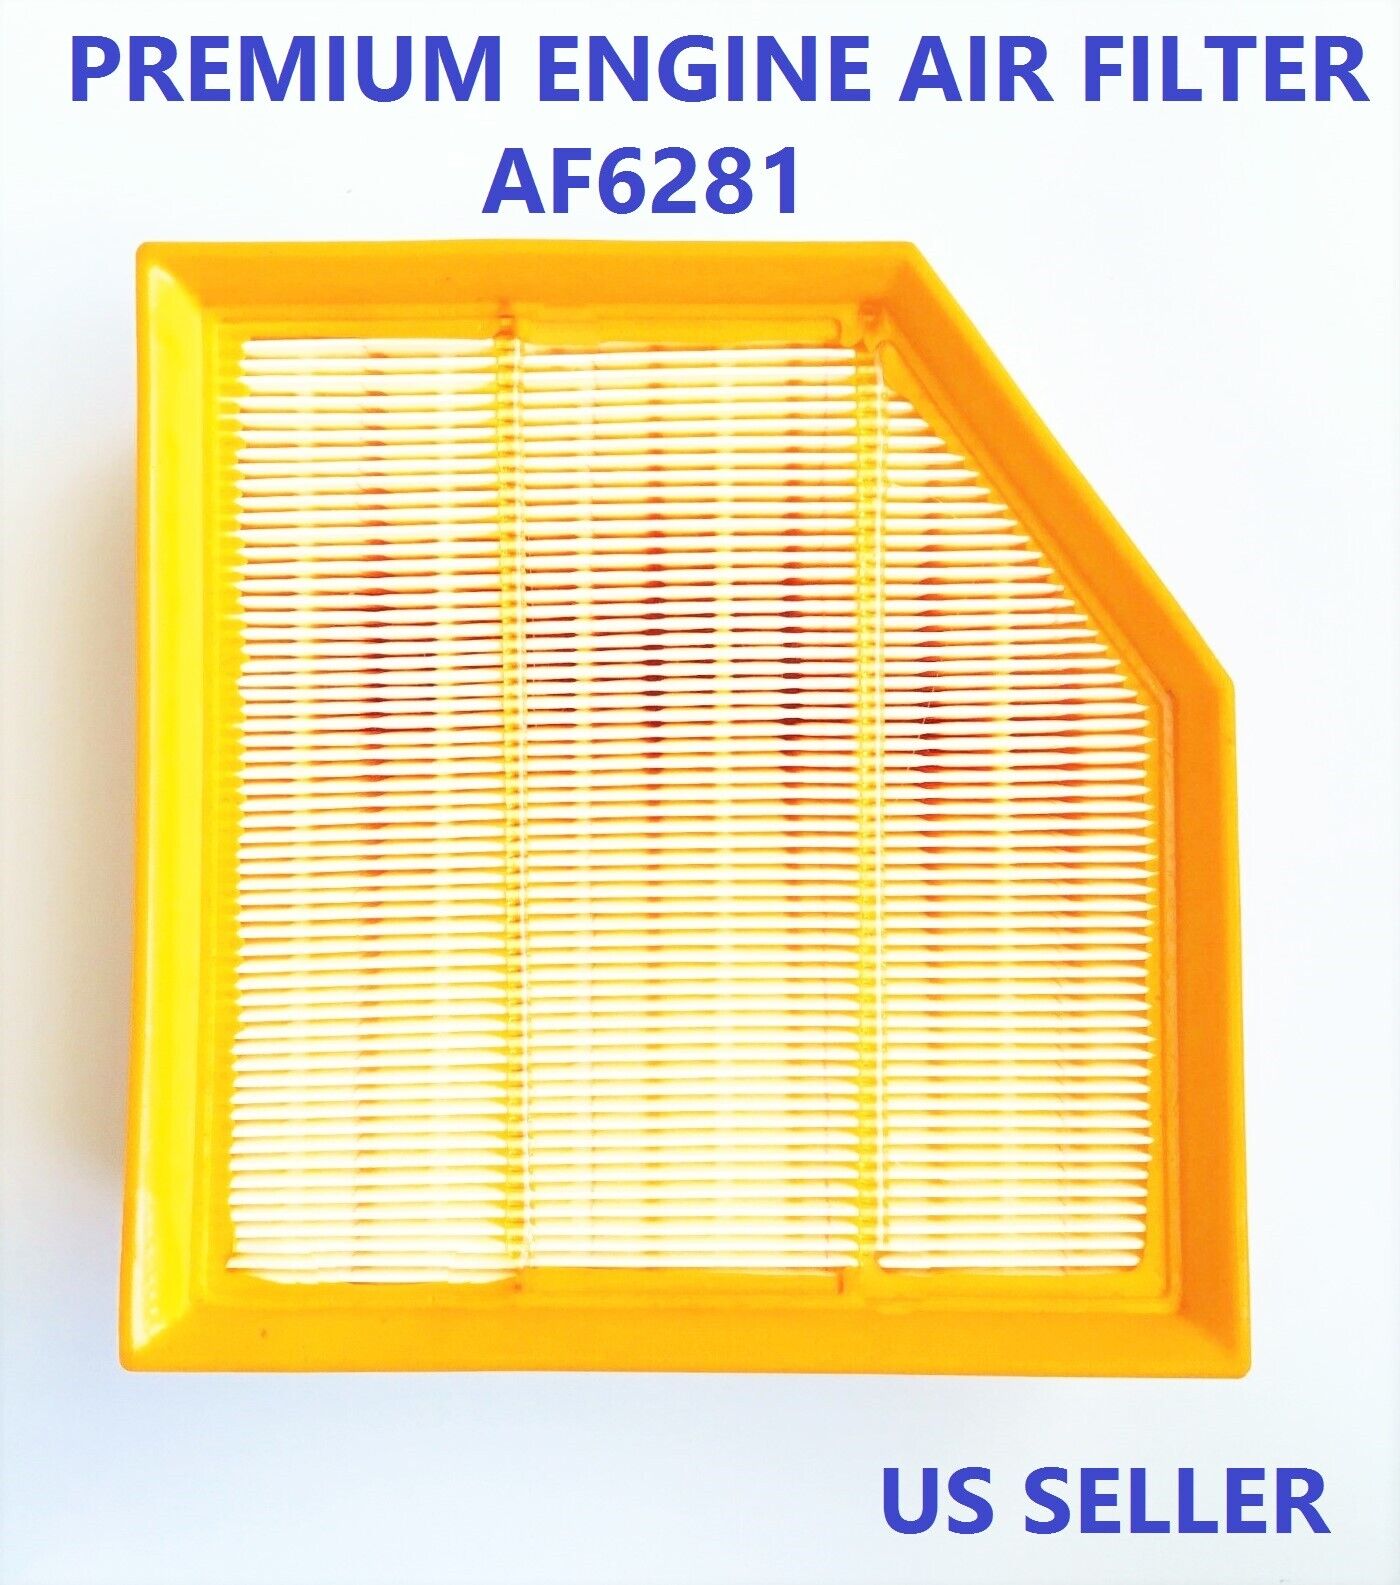 CA11431 QUALITY ENGINE AIR FILTER for 2013 - 2016 DODGE DART REPLACE 4627127AB